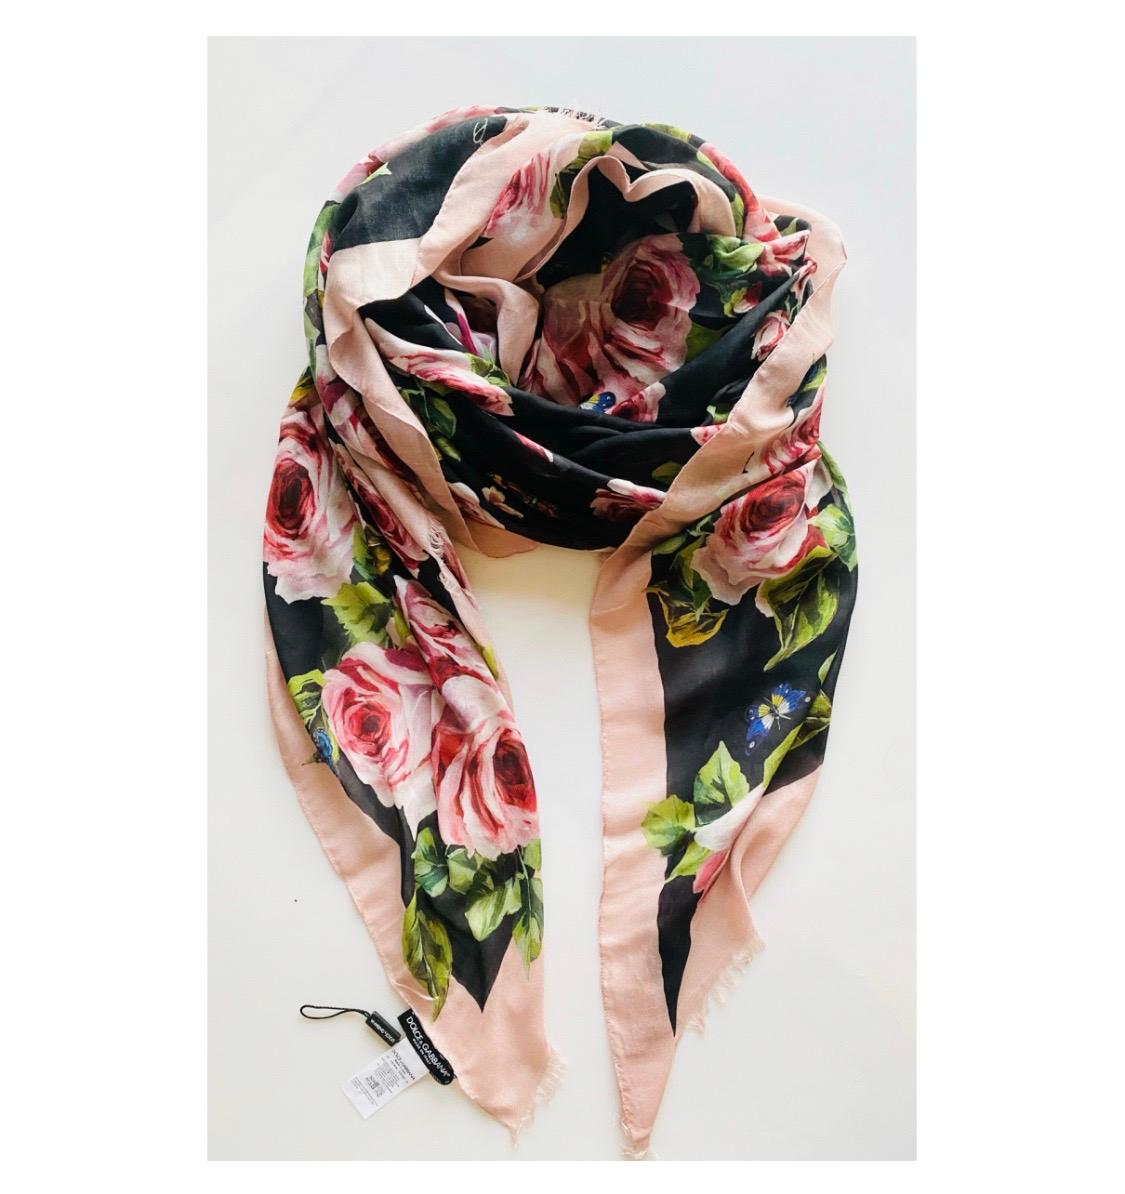 Dolce & Gabbana Pink Rose
Butterfly printed cashmere modal
blended scarf wrap

Floral Printed

Modal and cashmere-blend
Frayed trims

Dry clean

Made in Italy

90% Modal 10% Cashmere

Brand new with original tags!
Gift bag can be added on